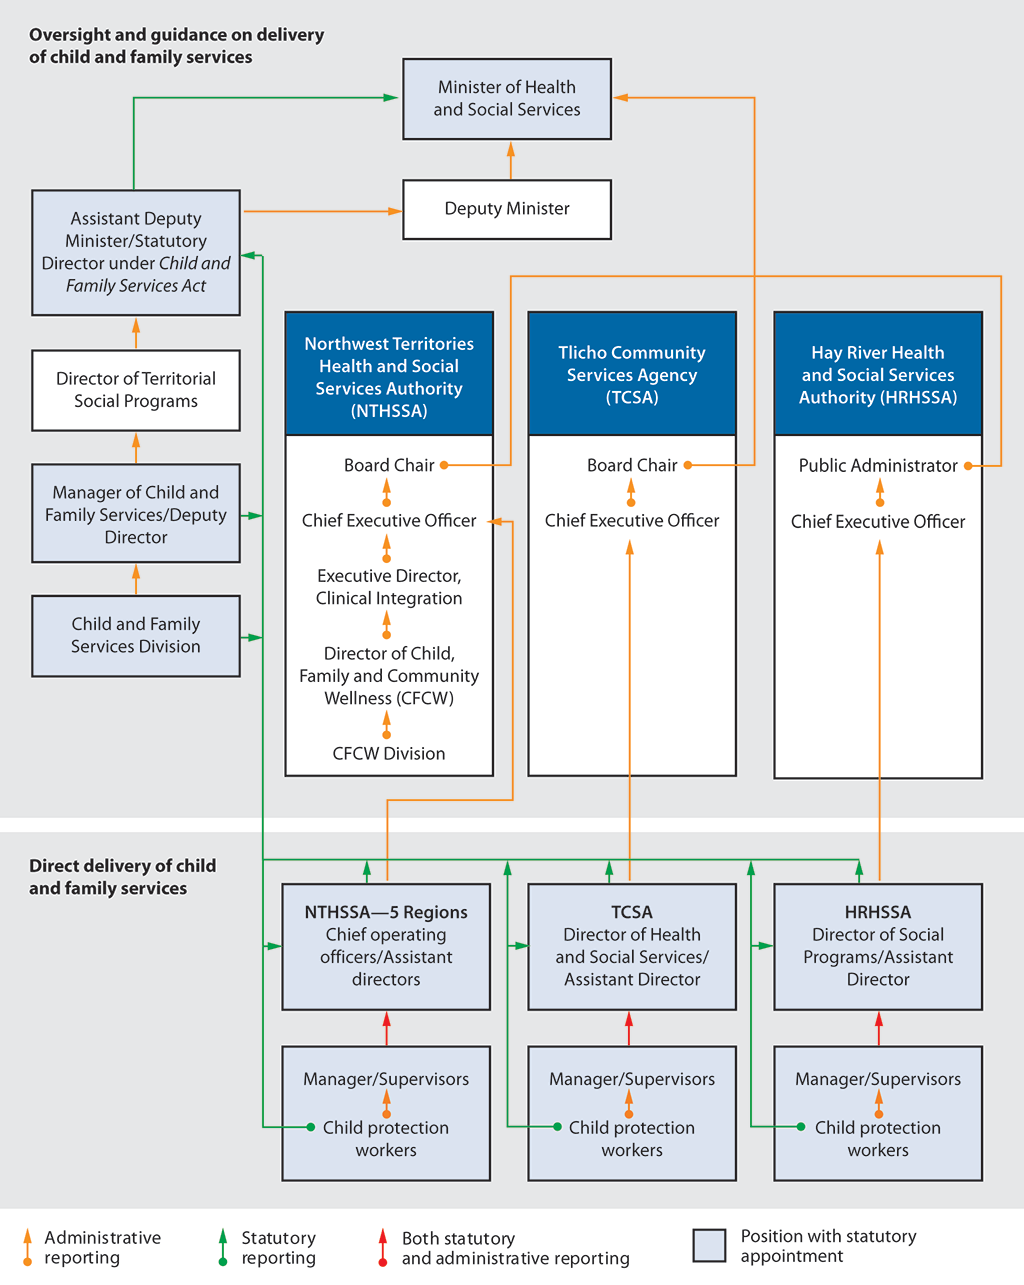 The organizational chart shows the accountability and organizational structure for child and family services in the Northwest Territories